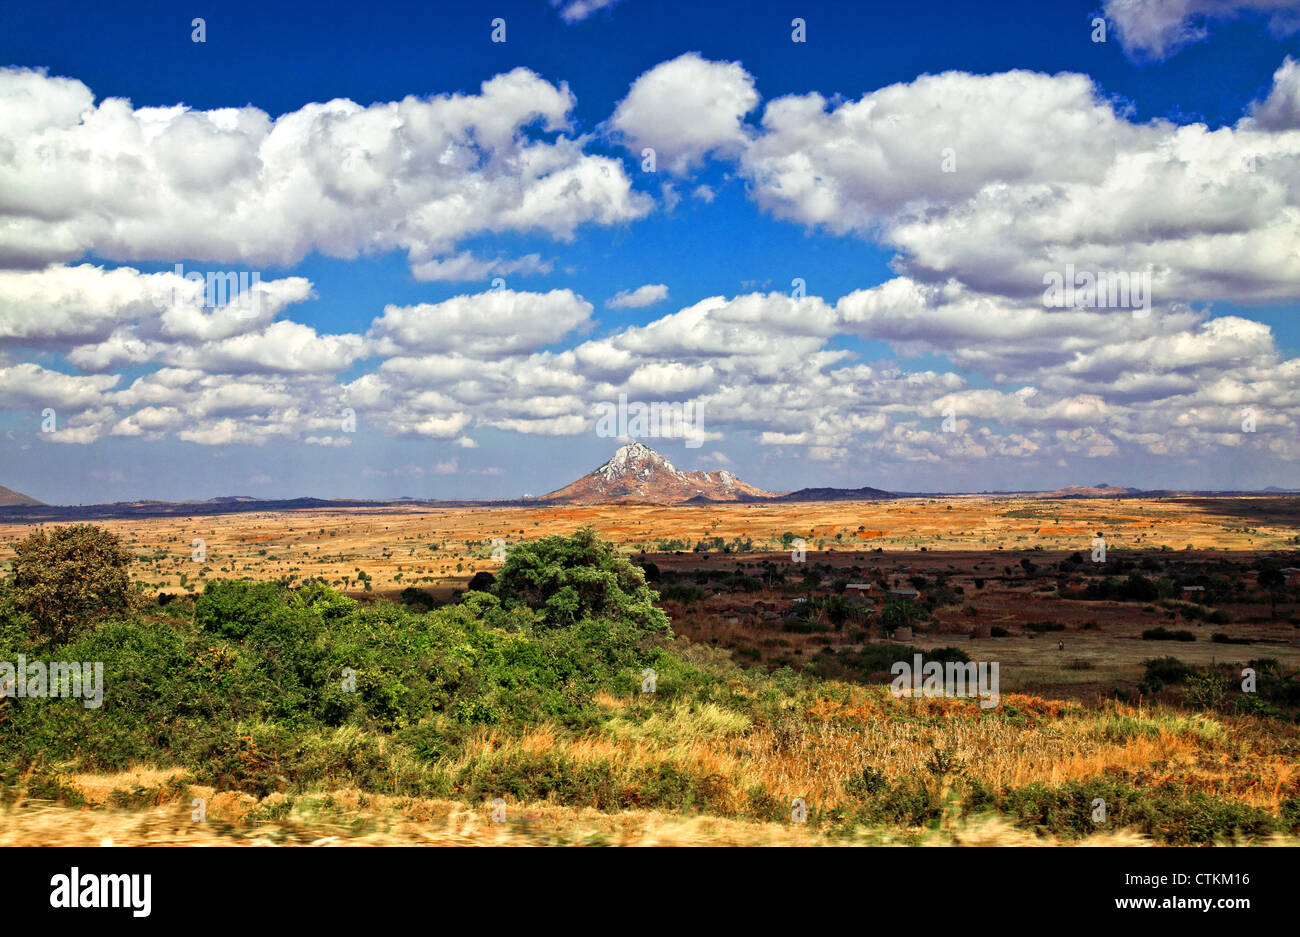 great landscape in malawi africa Stock Photo